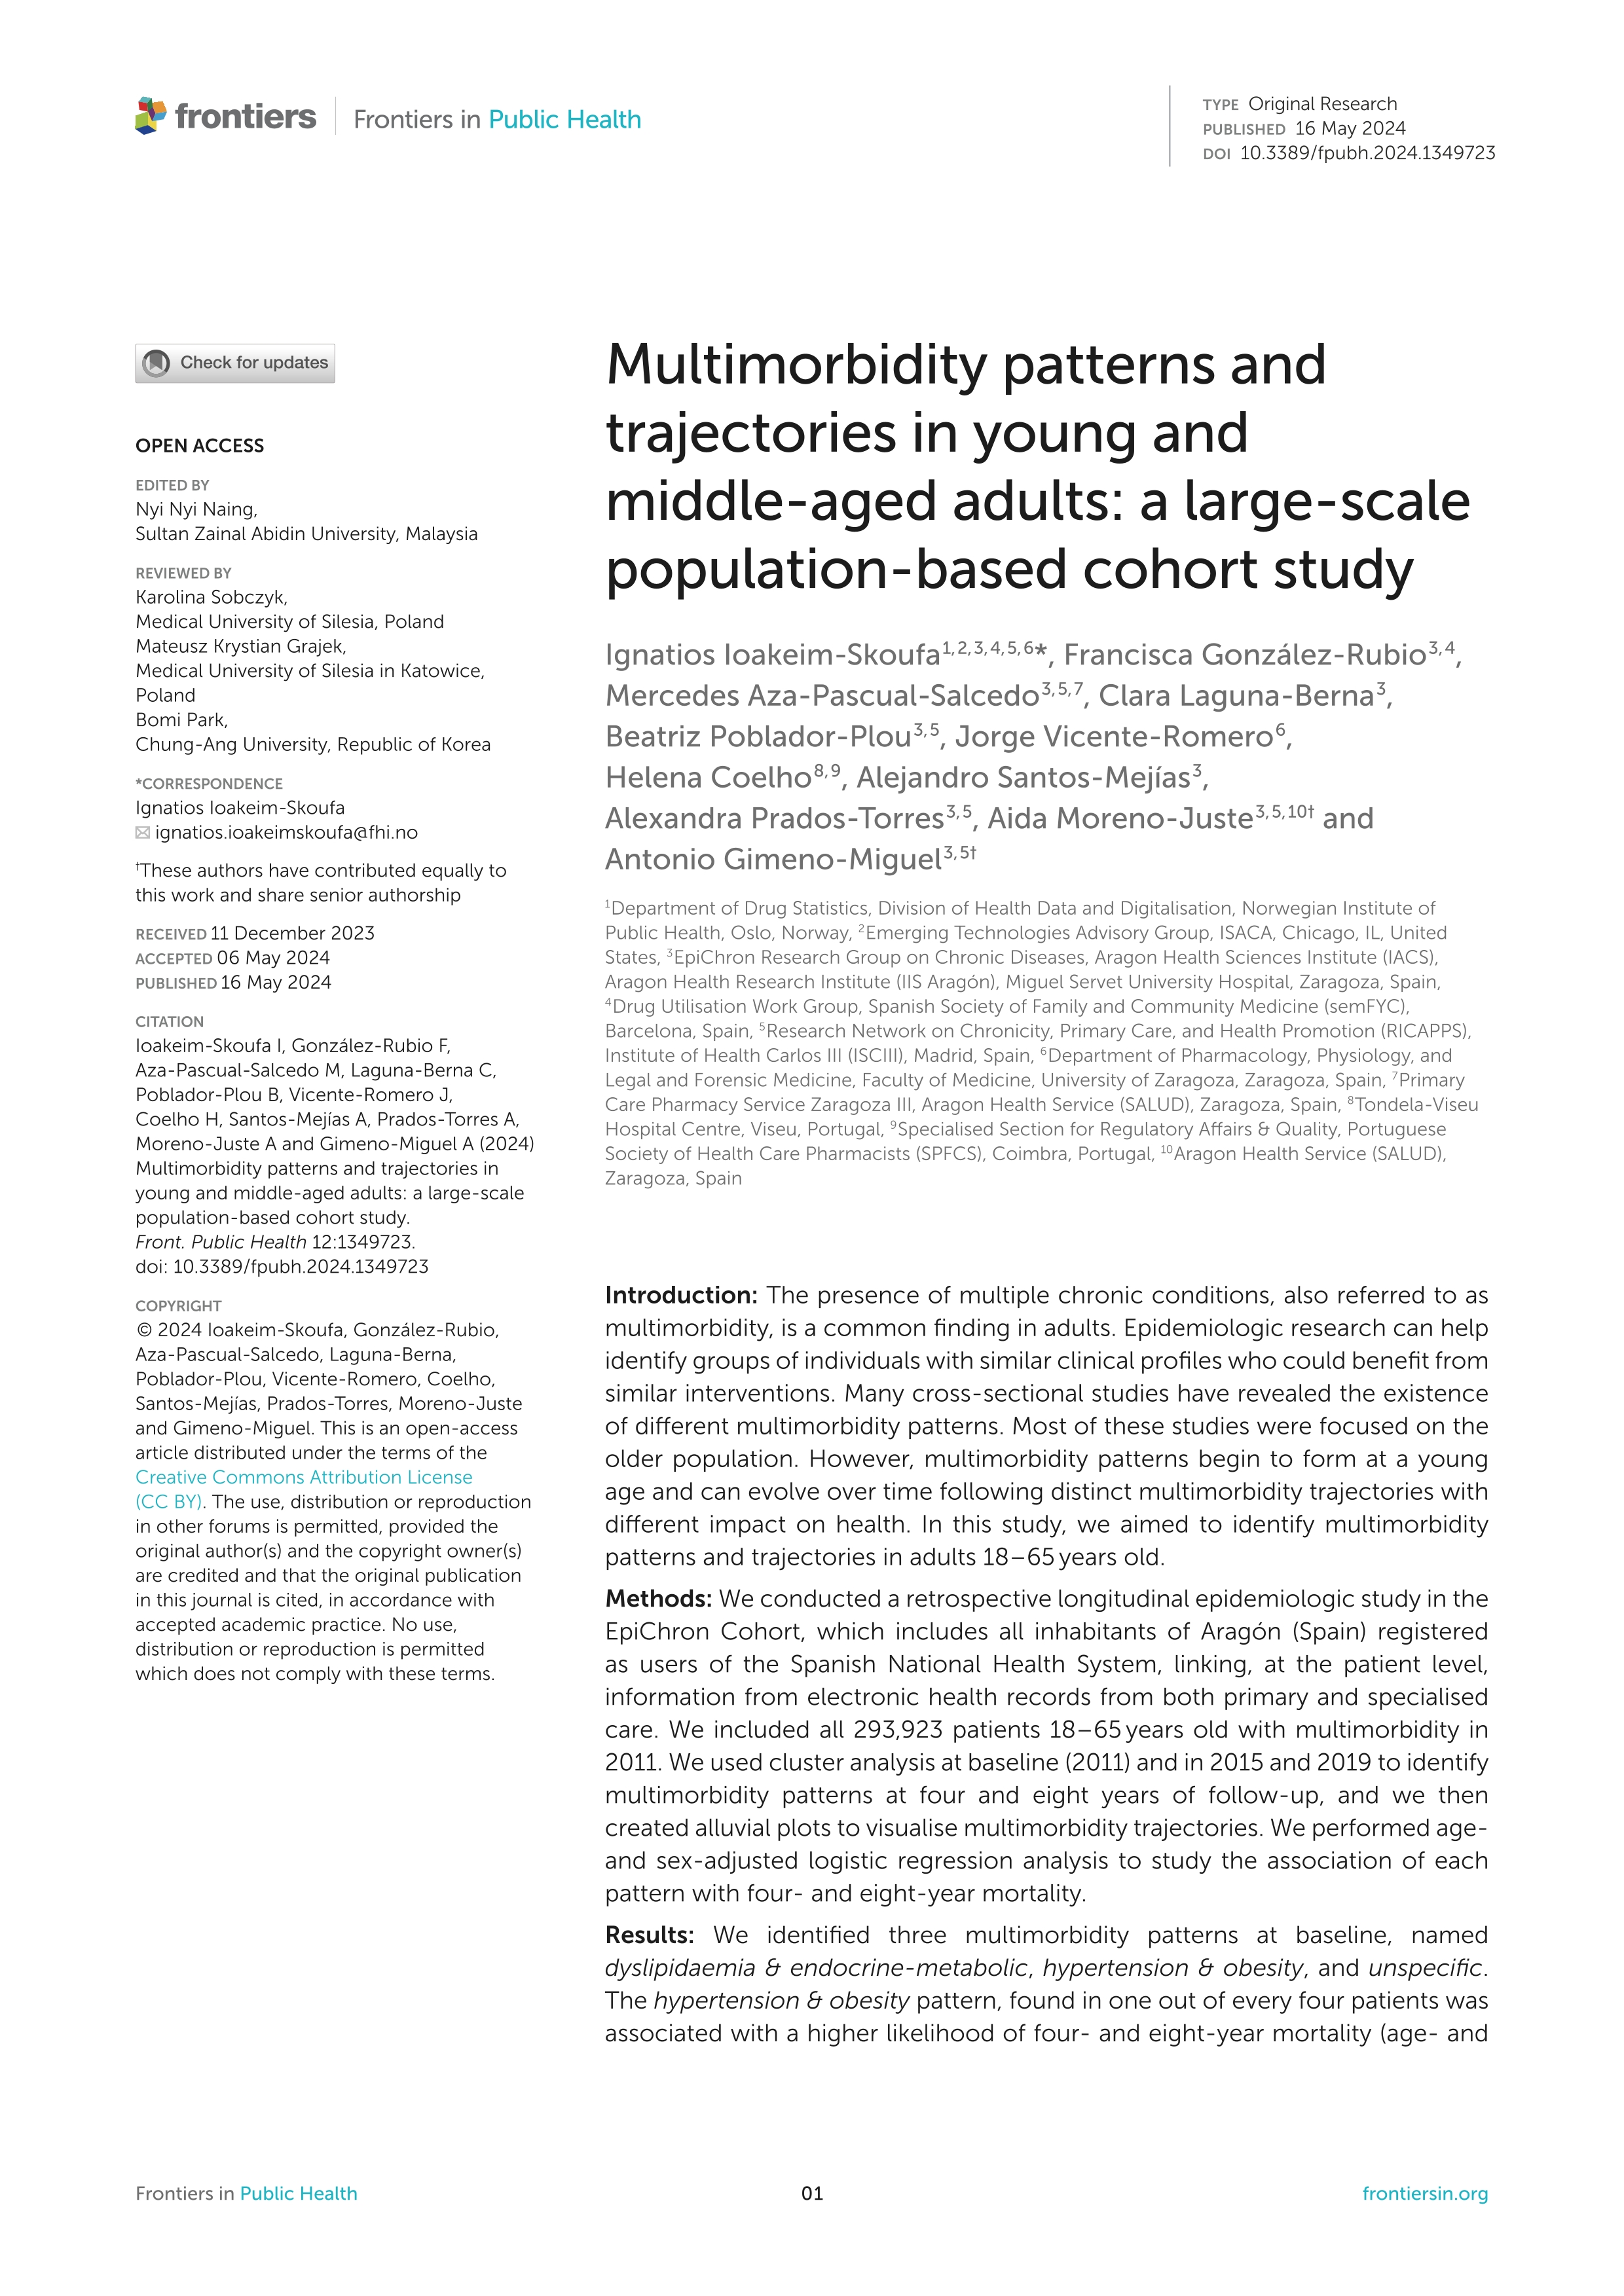 Multimorbidity patterns and trajectories in young and middle-aged adults: a large-scale population-based cohort study